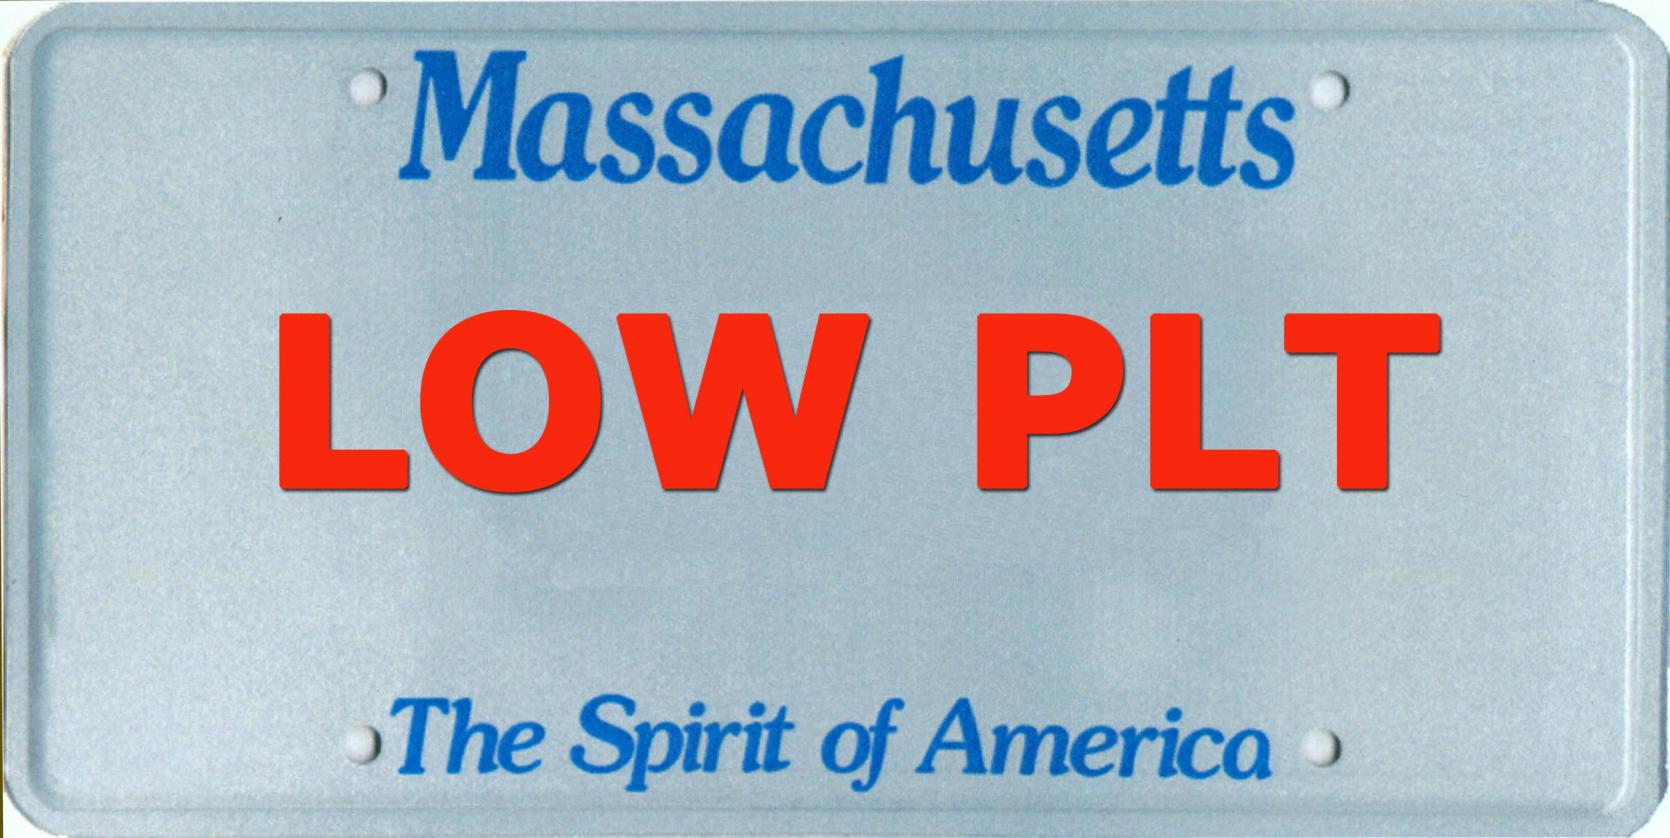 Massachusetts Registry of Motor Vehicles Schedules Low Number License Plate Lottery Drawing ...